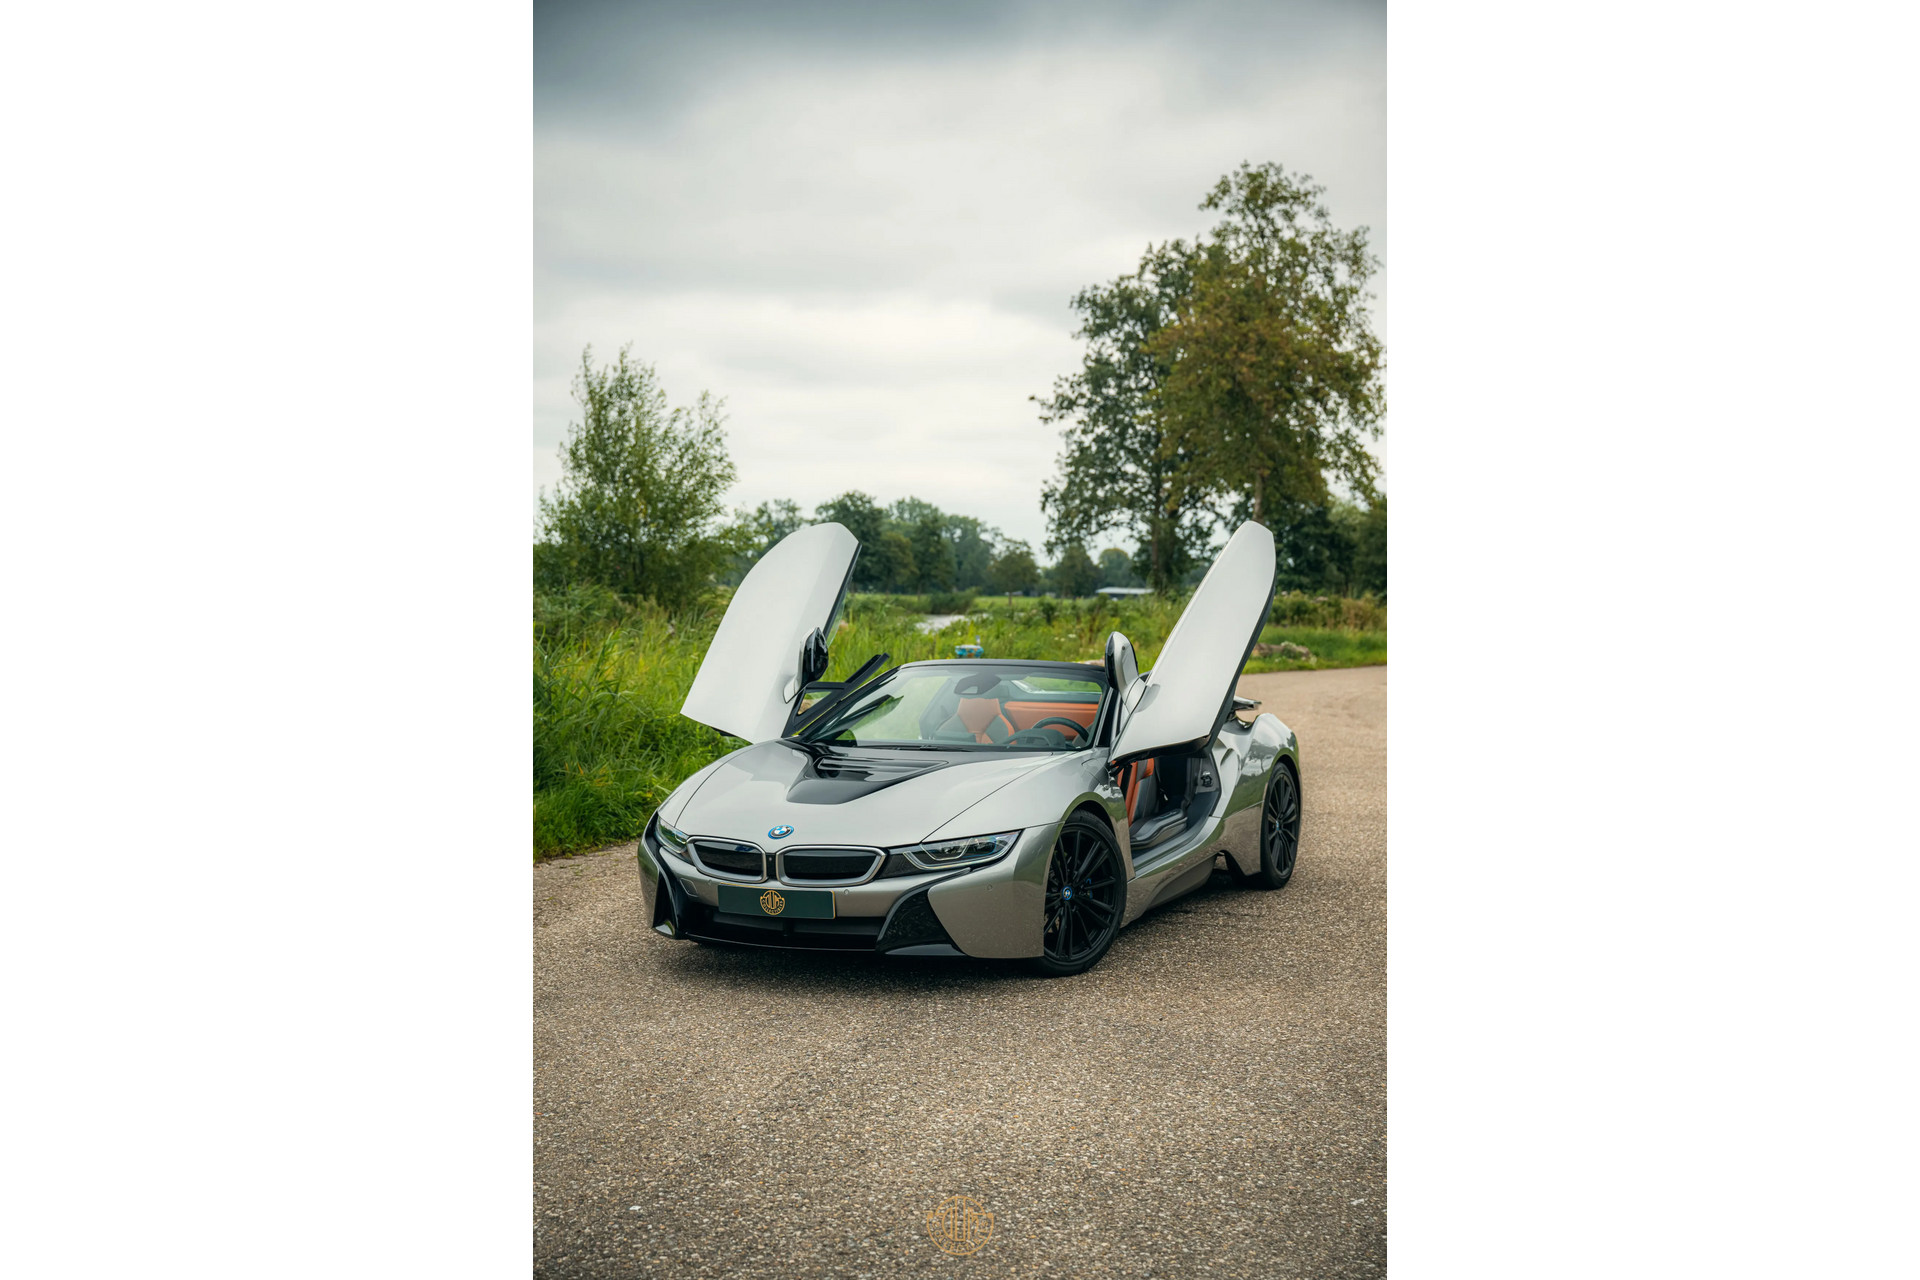 BMW i8 Roadster 1.5 First Edition Roadster 2018 Bmw individual special request lakkleur 1